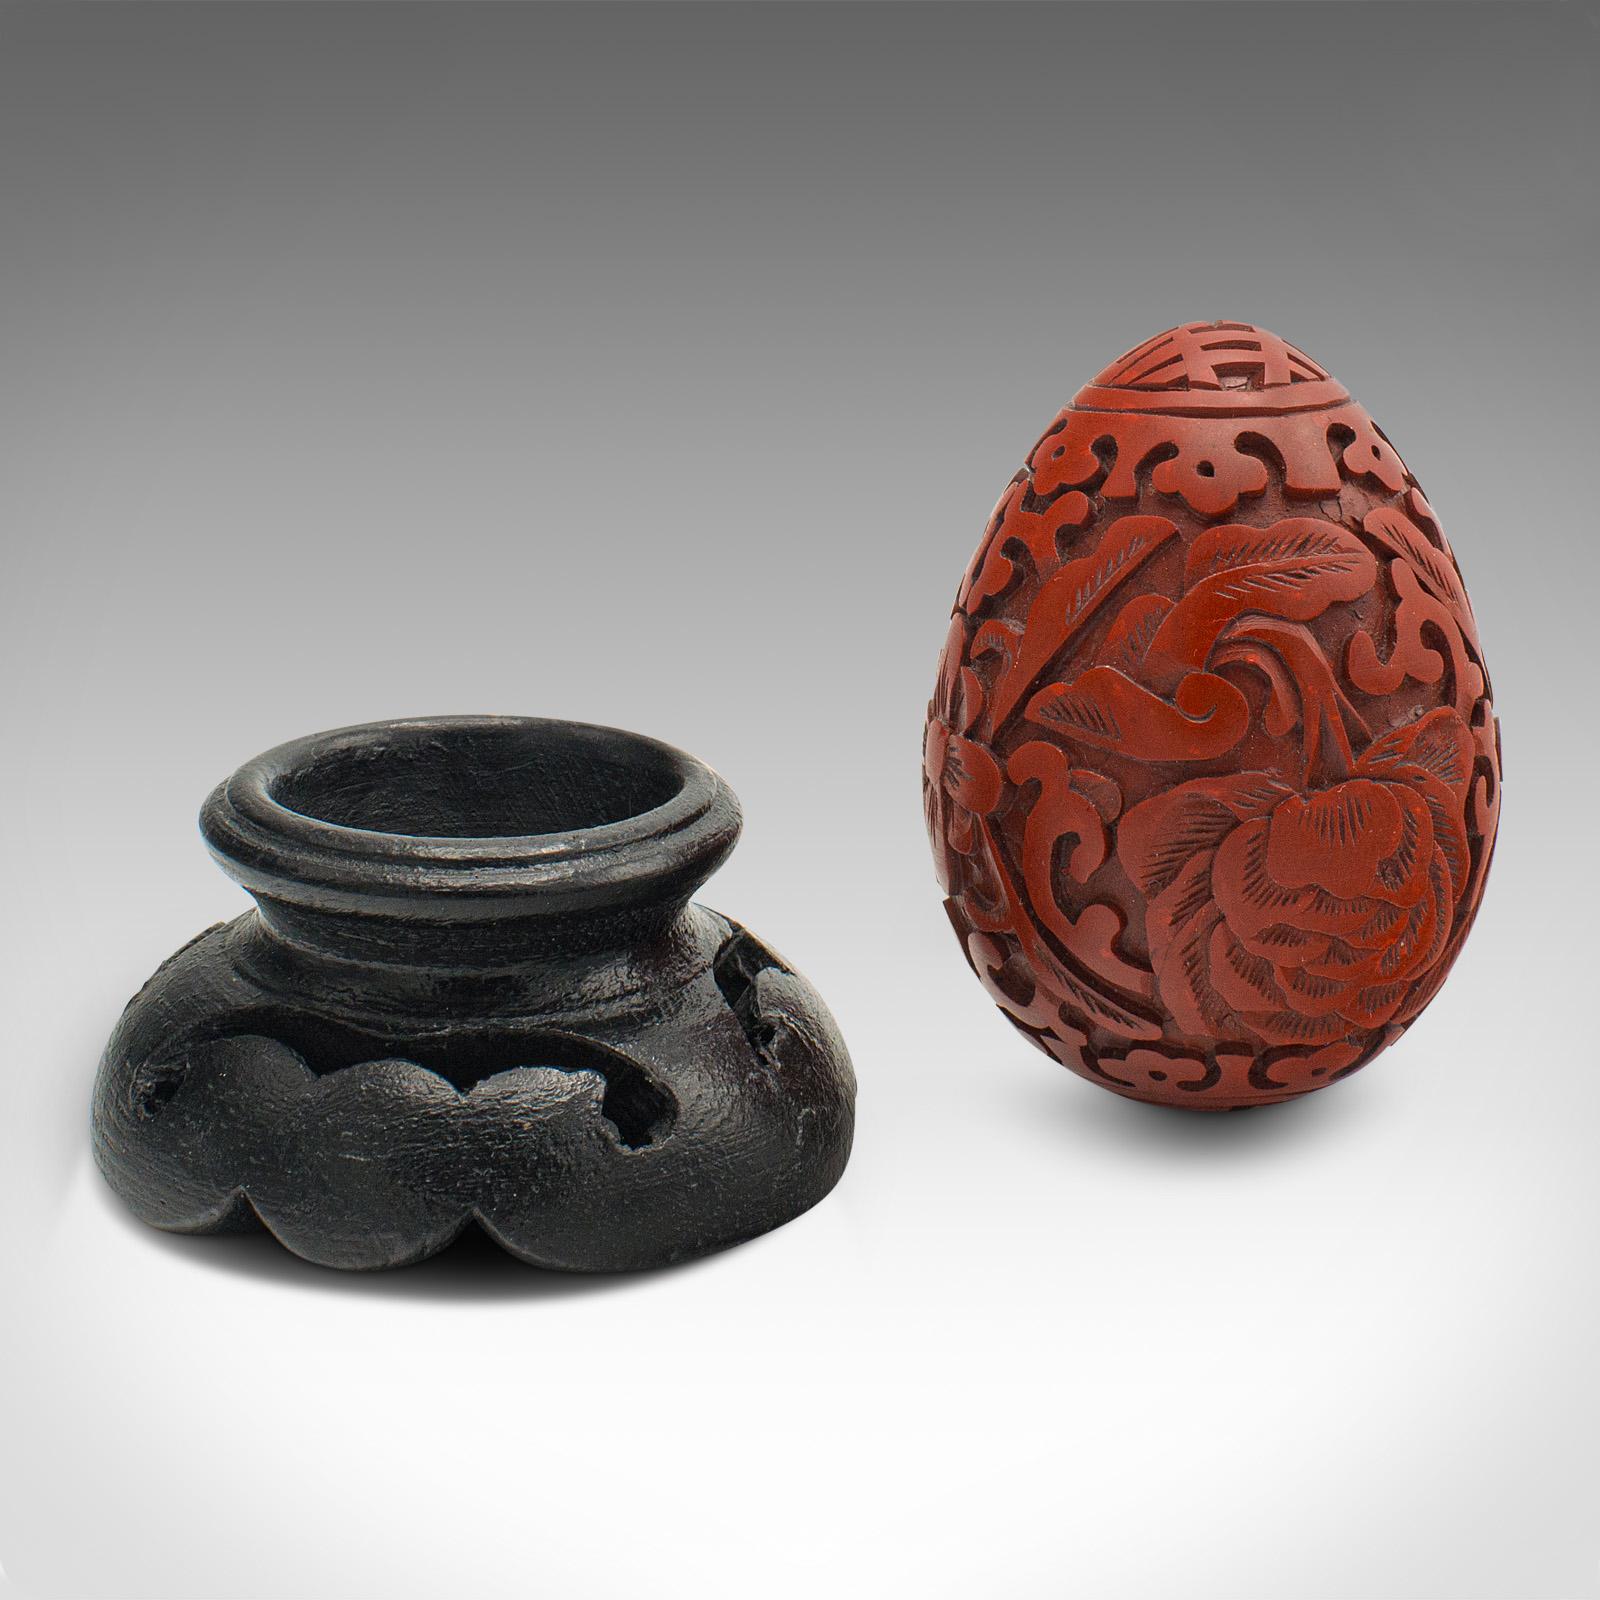 This is a small vintage decorative egg. A Chinese, cinnabar ornament on ebonised display stand, dating to the Mid-20th century, circa 1970.

Colourful carved egg with appealing detail
Displays a desirable aged patina and in good order
Striking